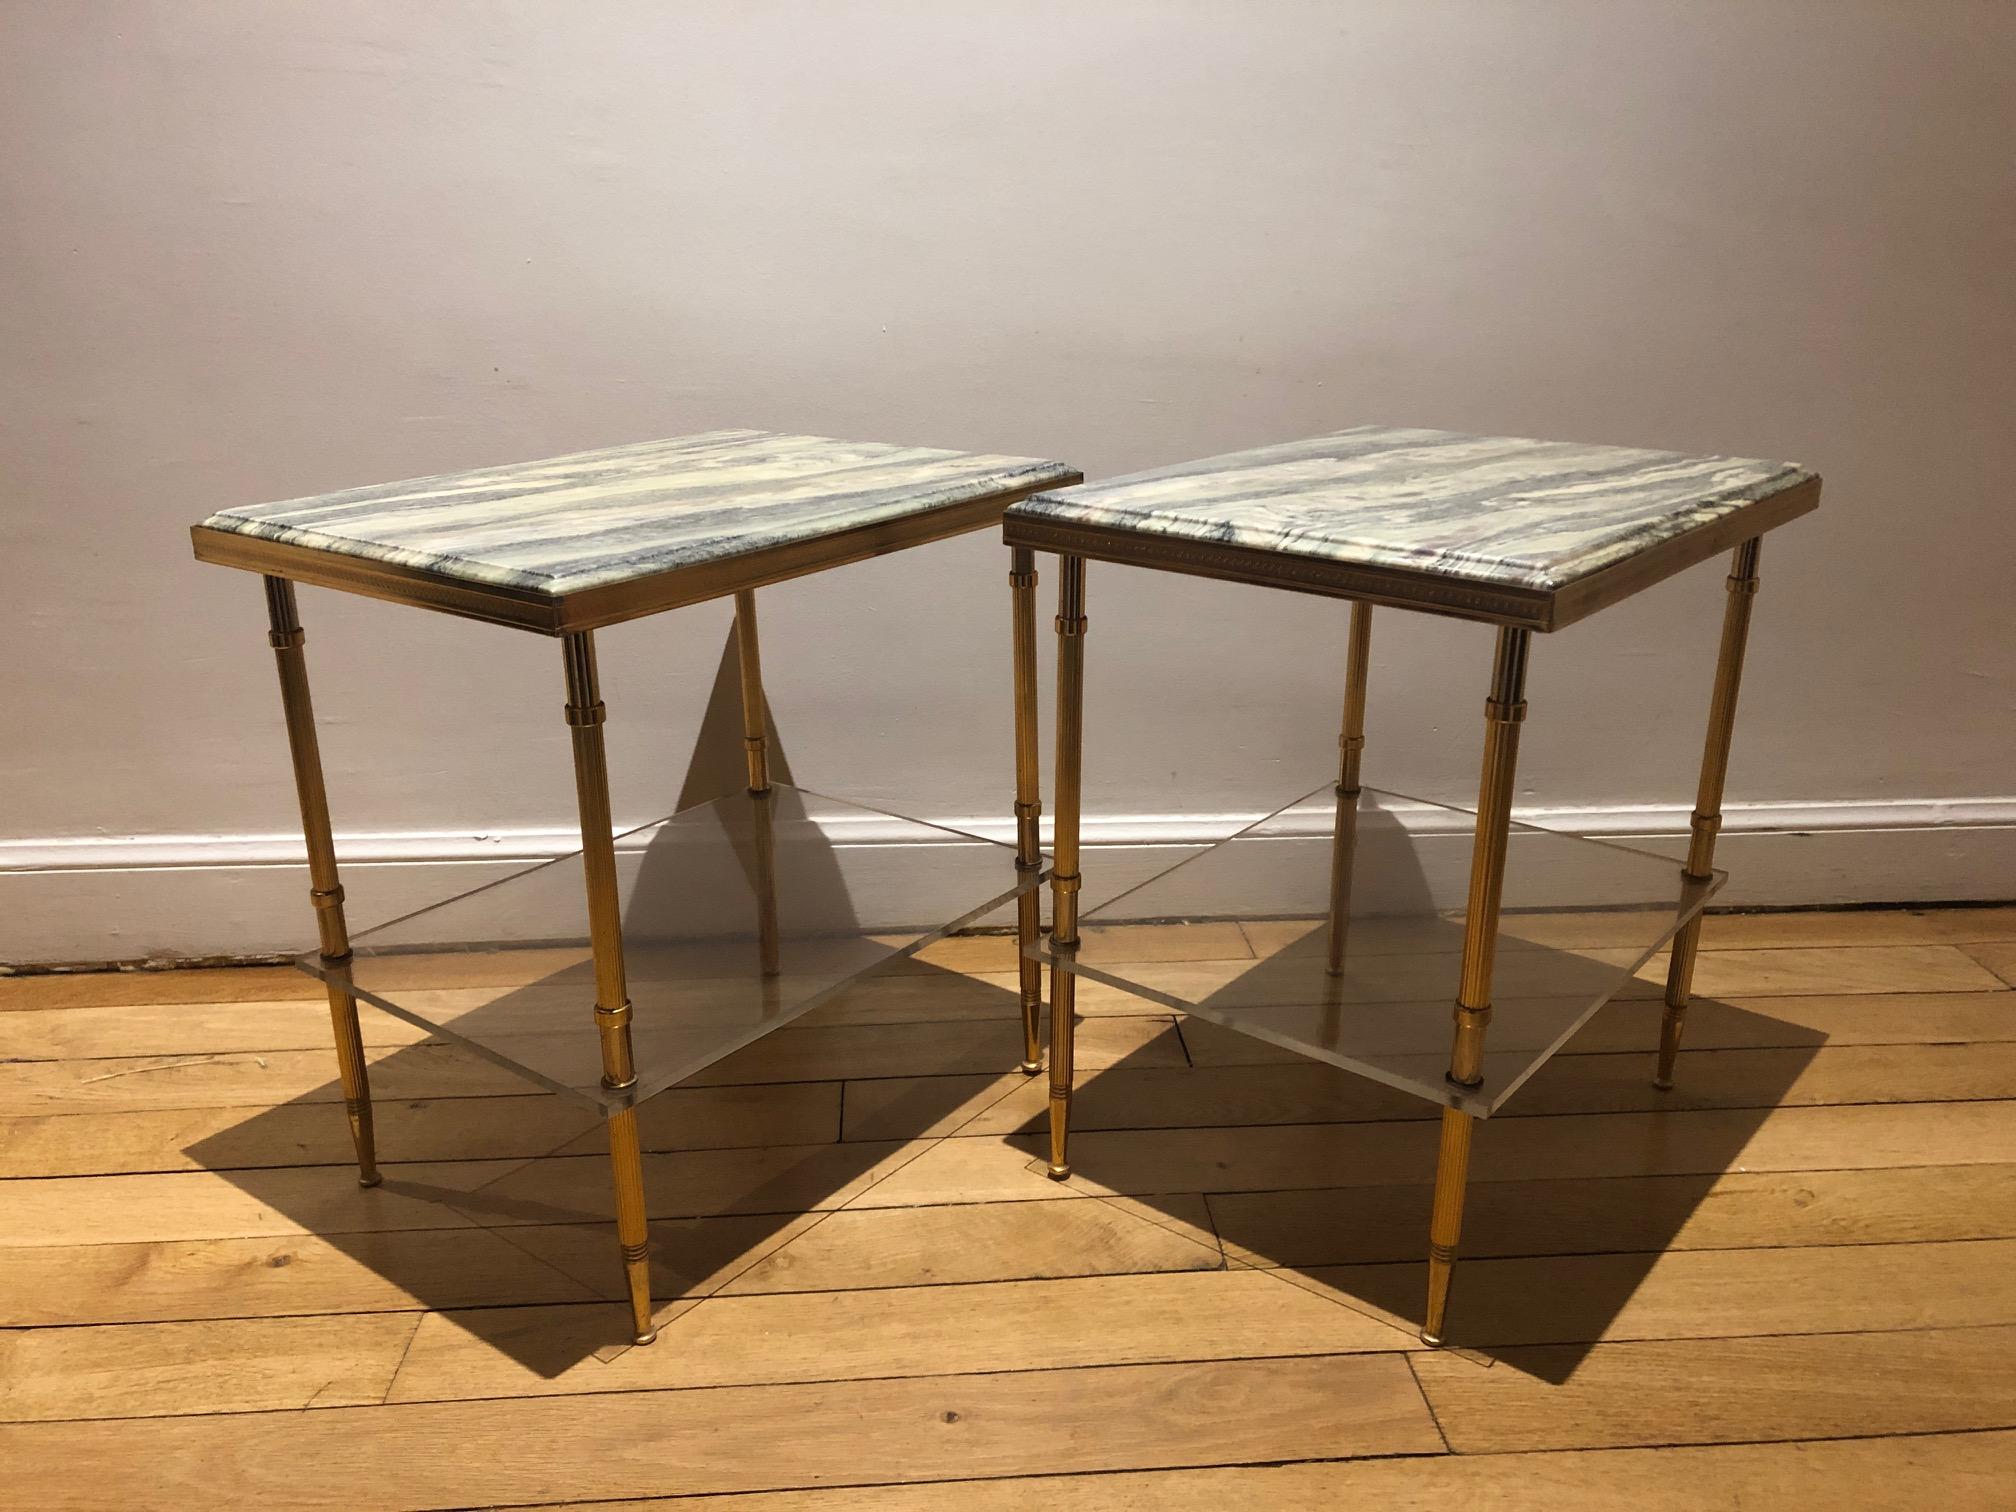 Two-tier neoclassical tables from the 1970s, top in varnish stone, shelf in plexiglass, structure in brass.